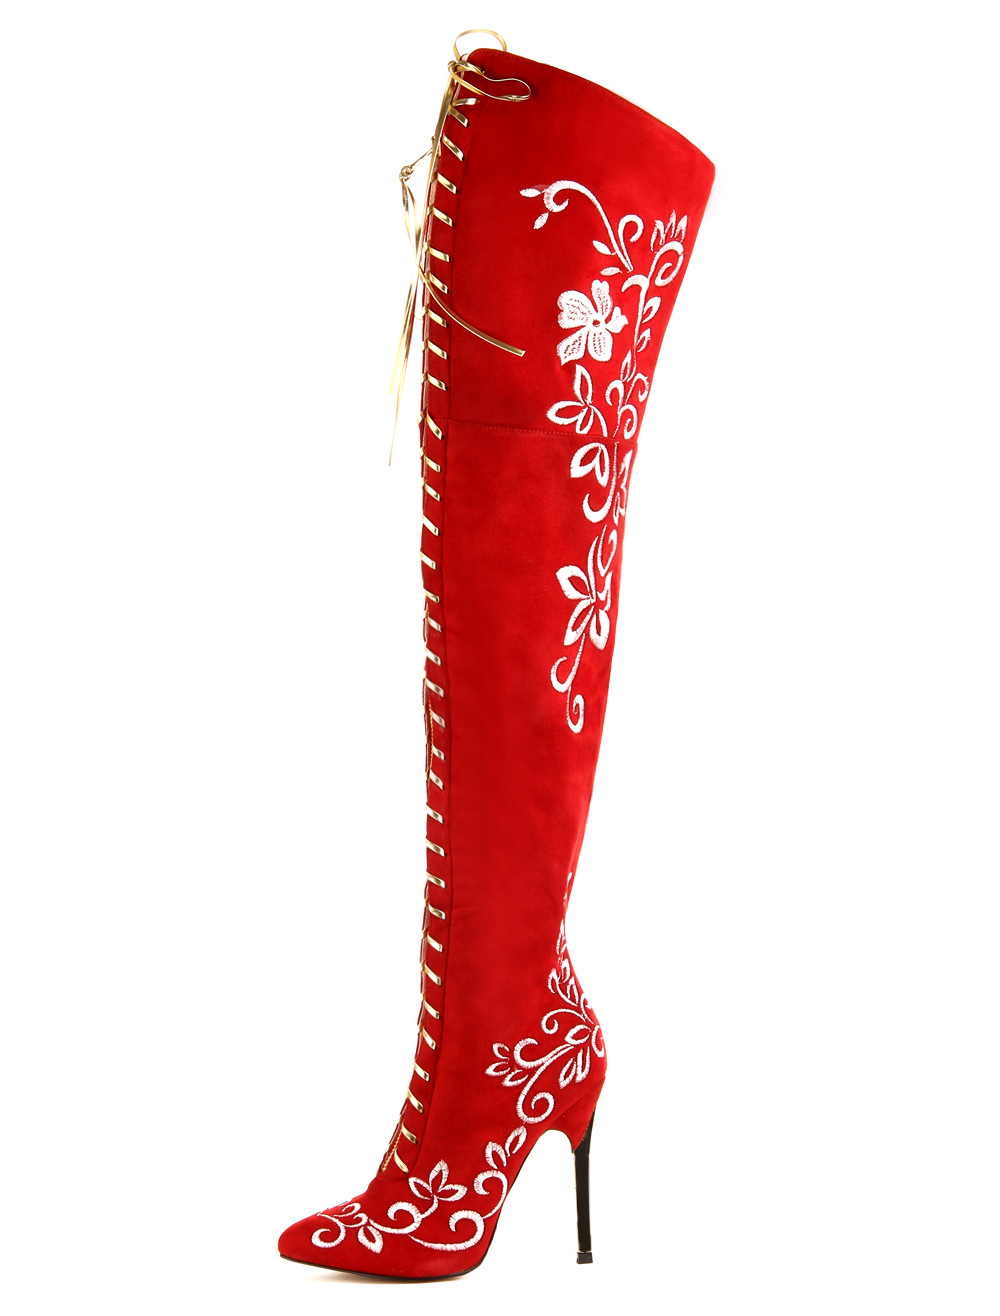 red pointed boots